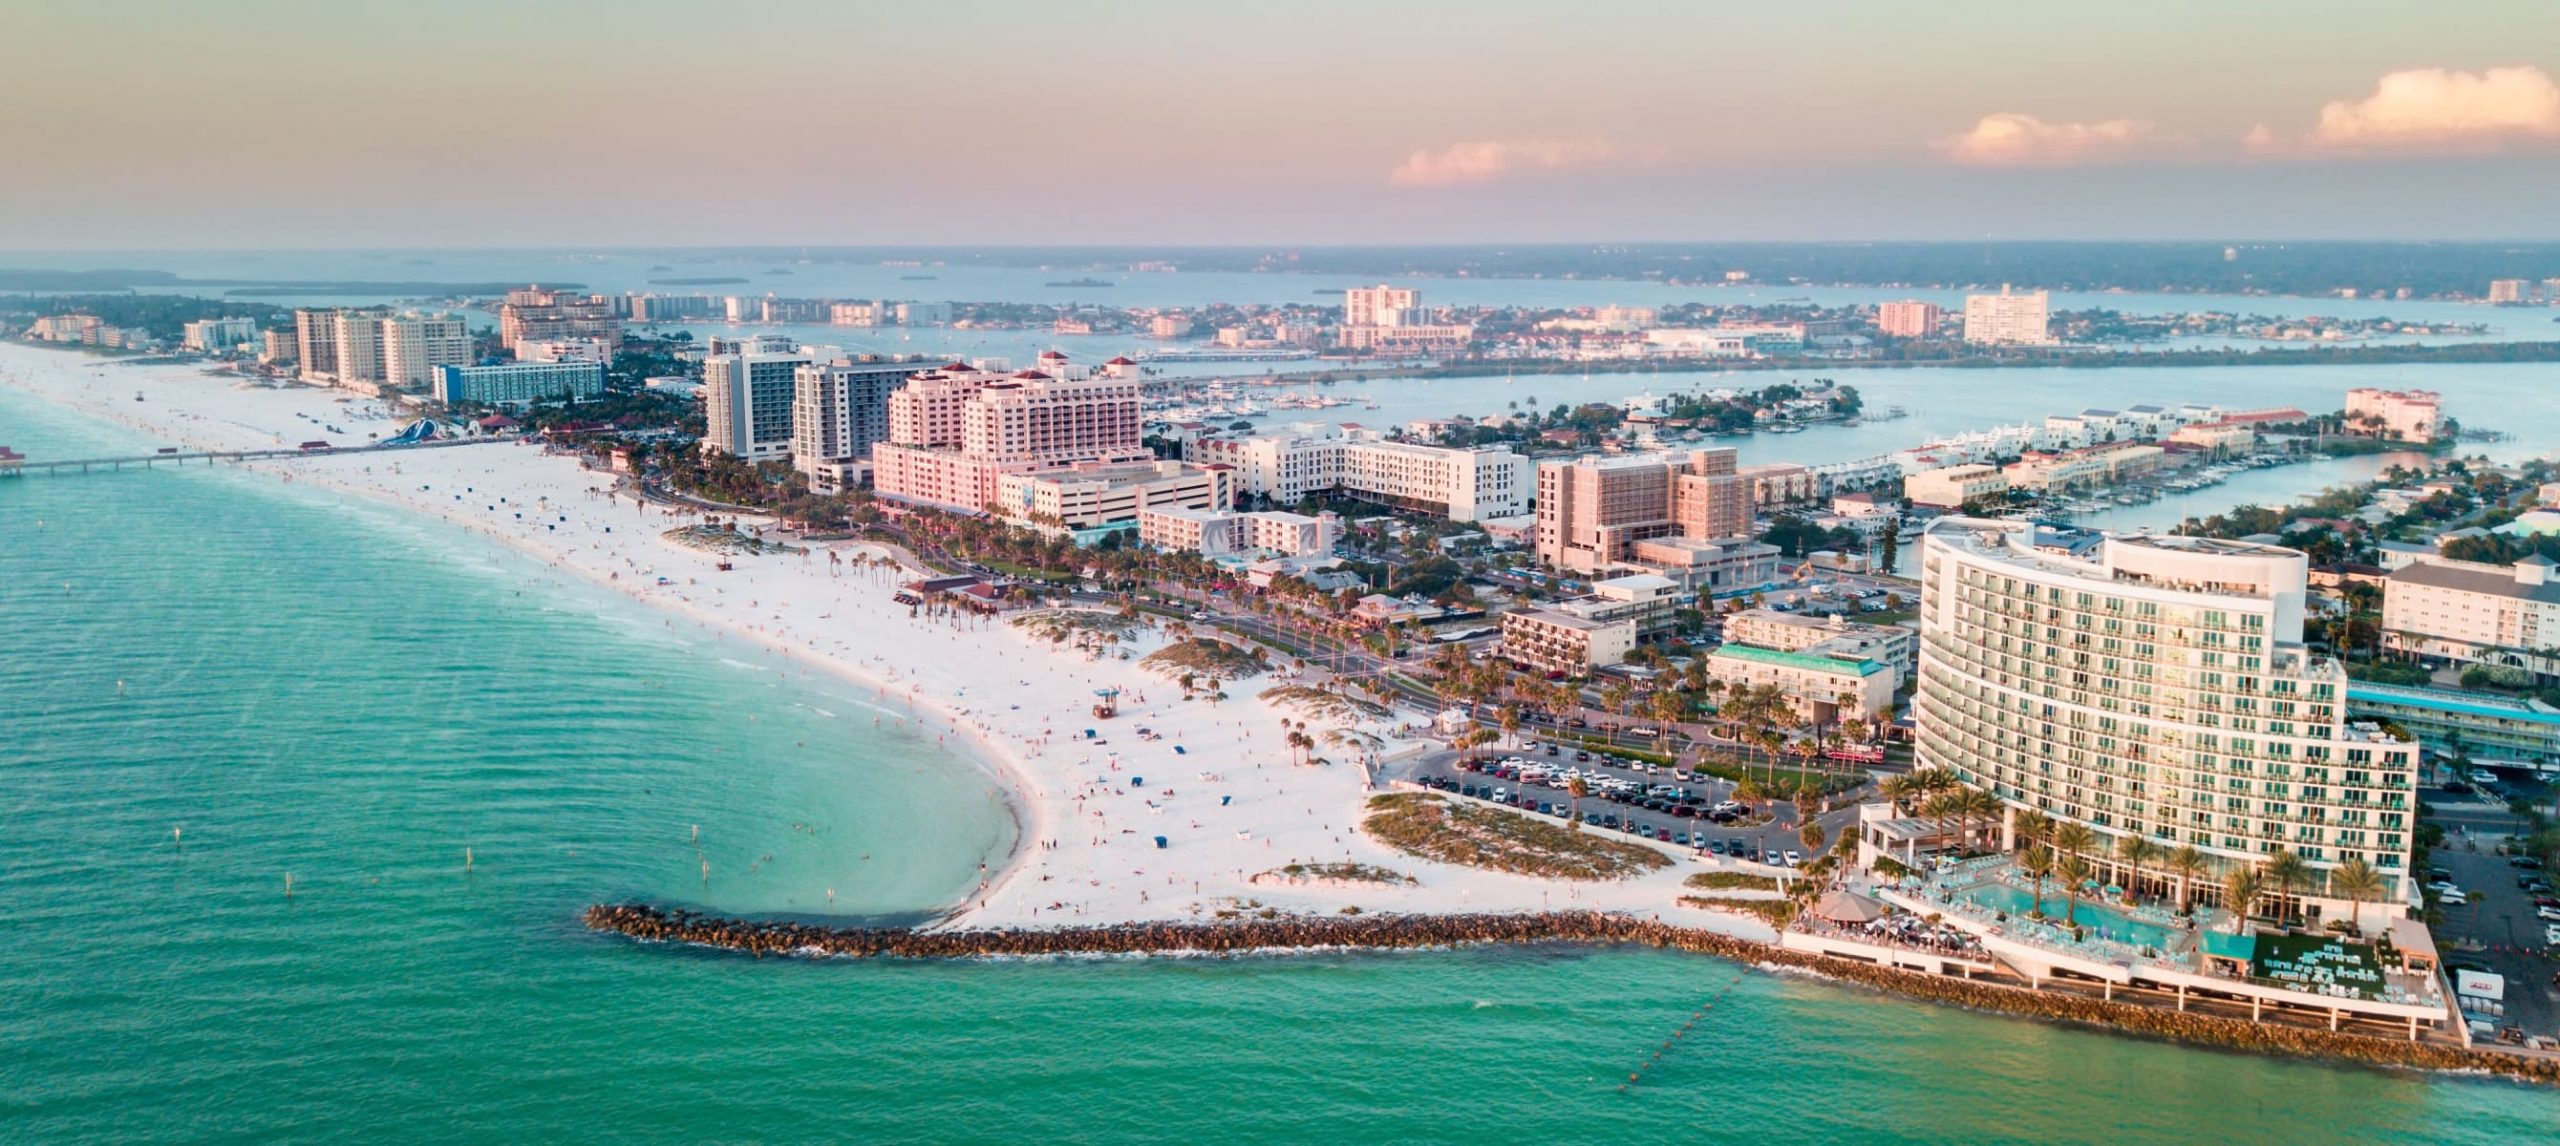 Aerial view of Clearwater Beach, Florida, USA.